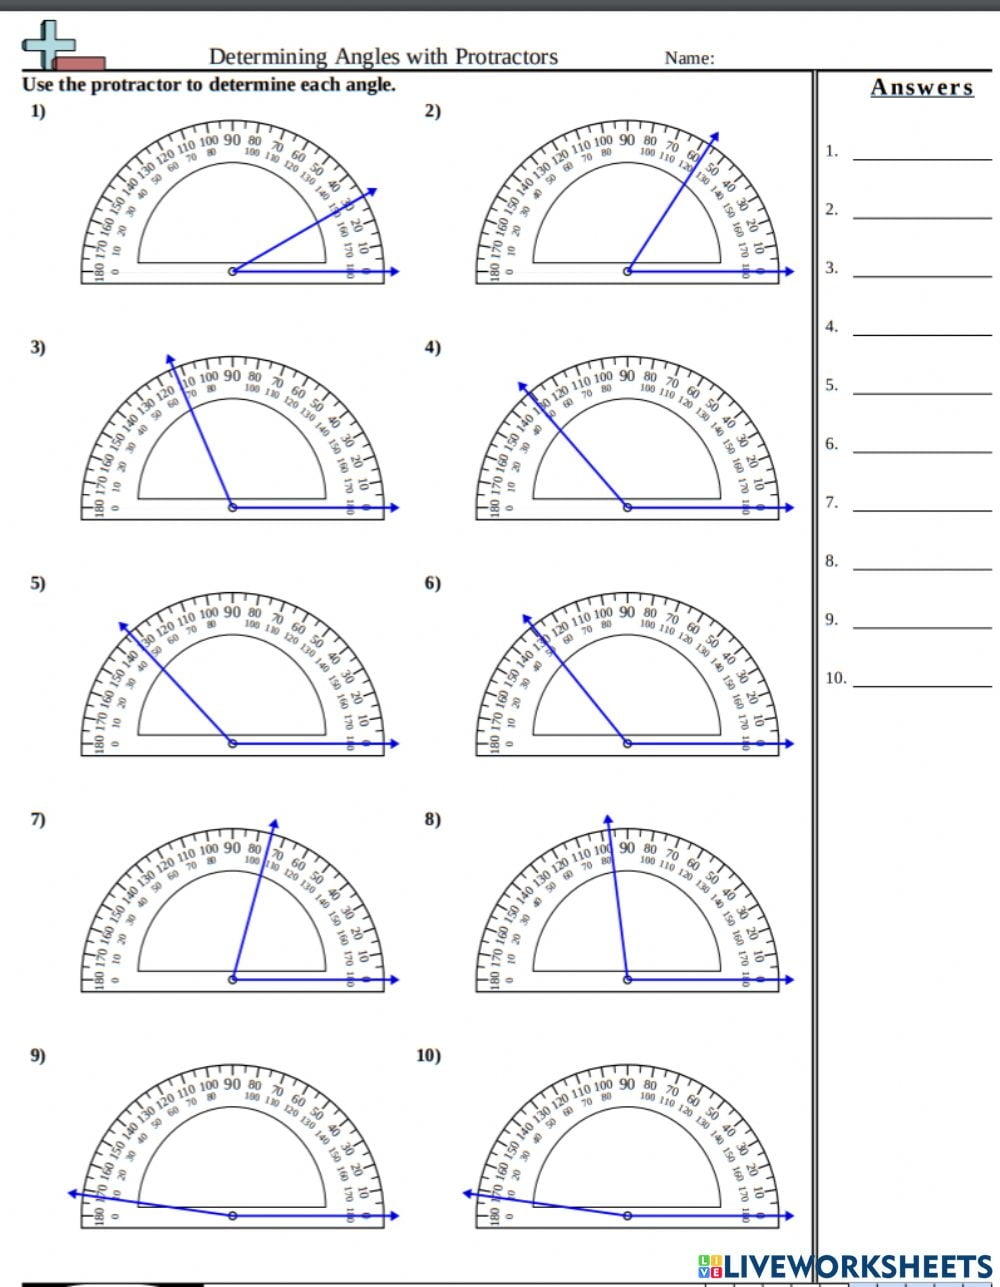 Reading Angles On A Protractor Worksheet